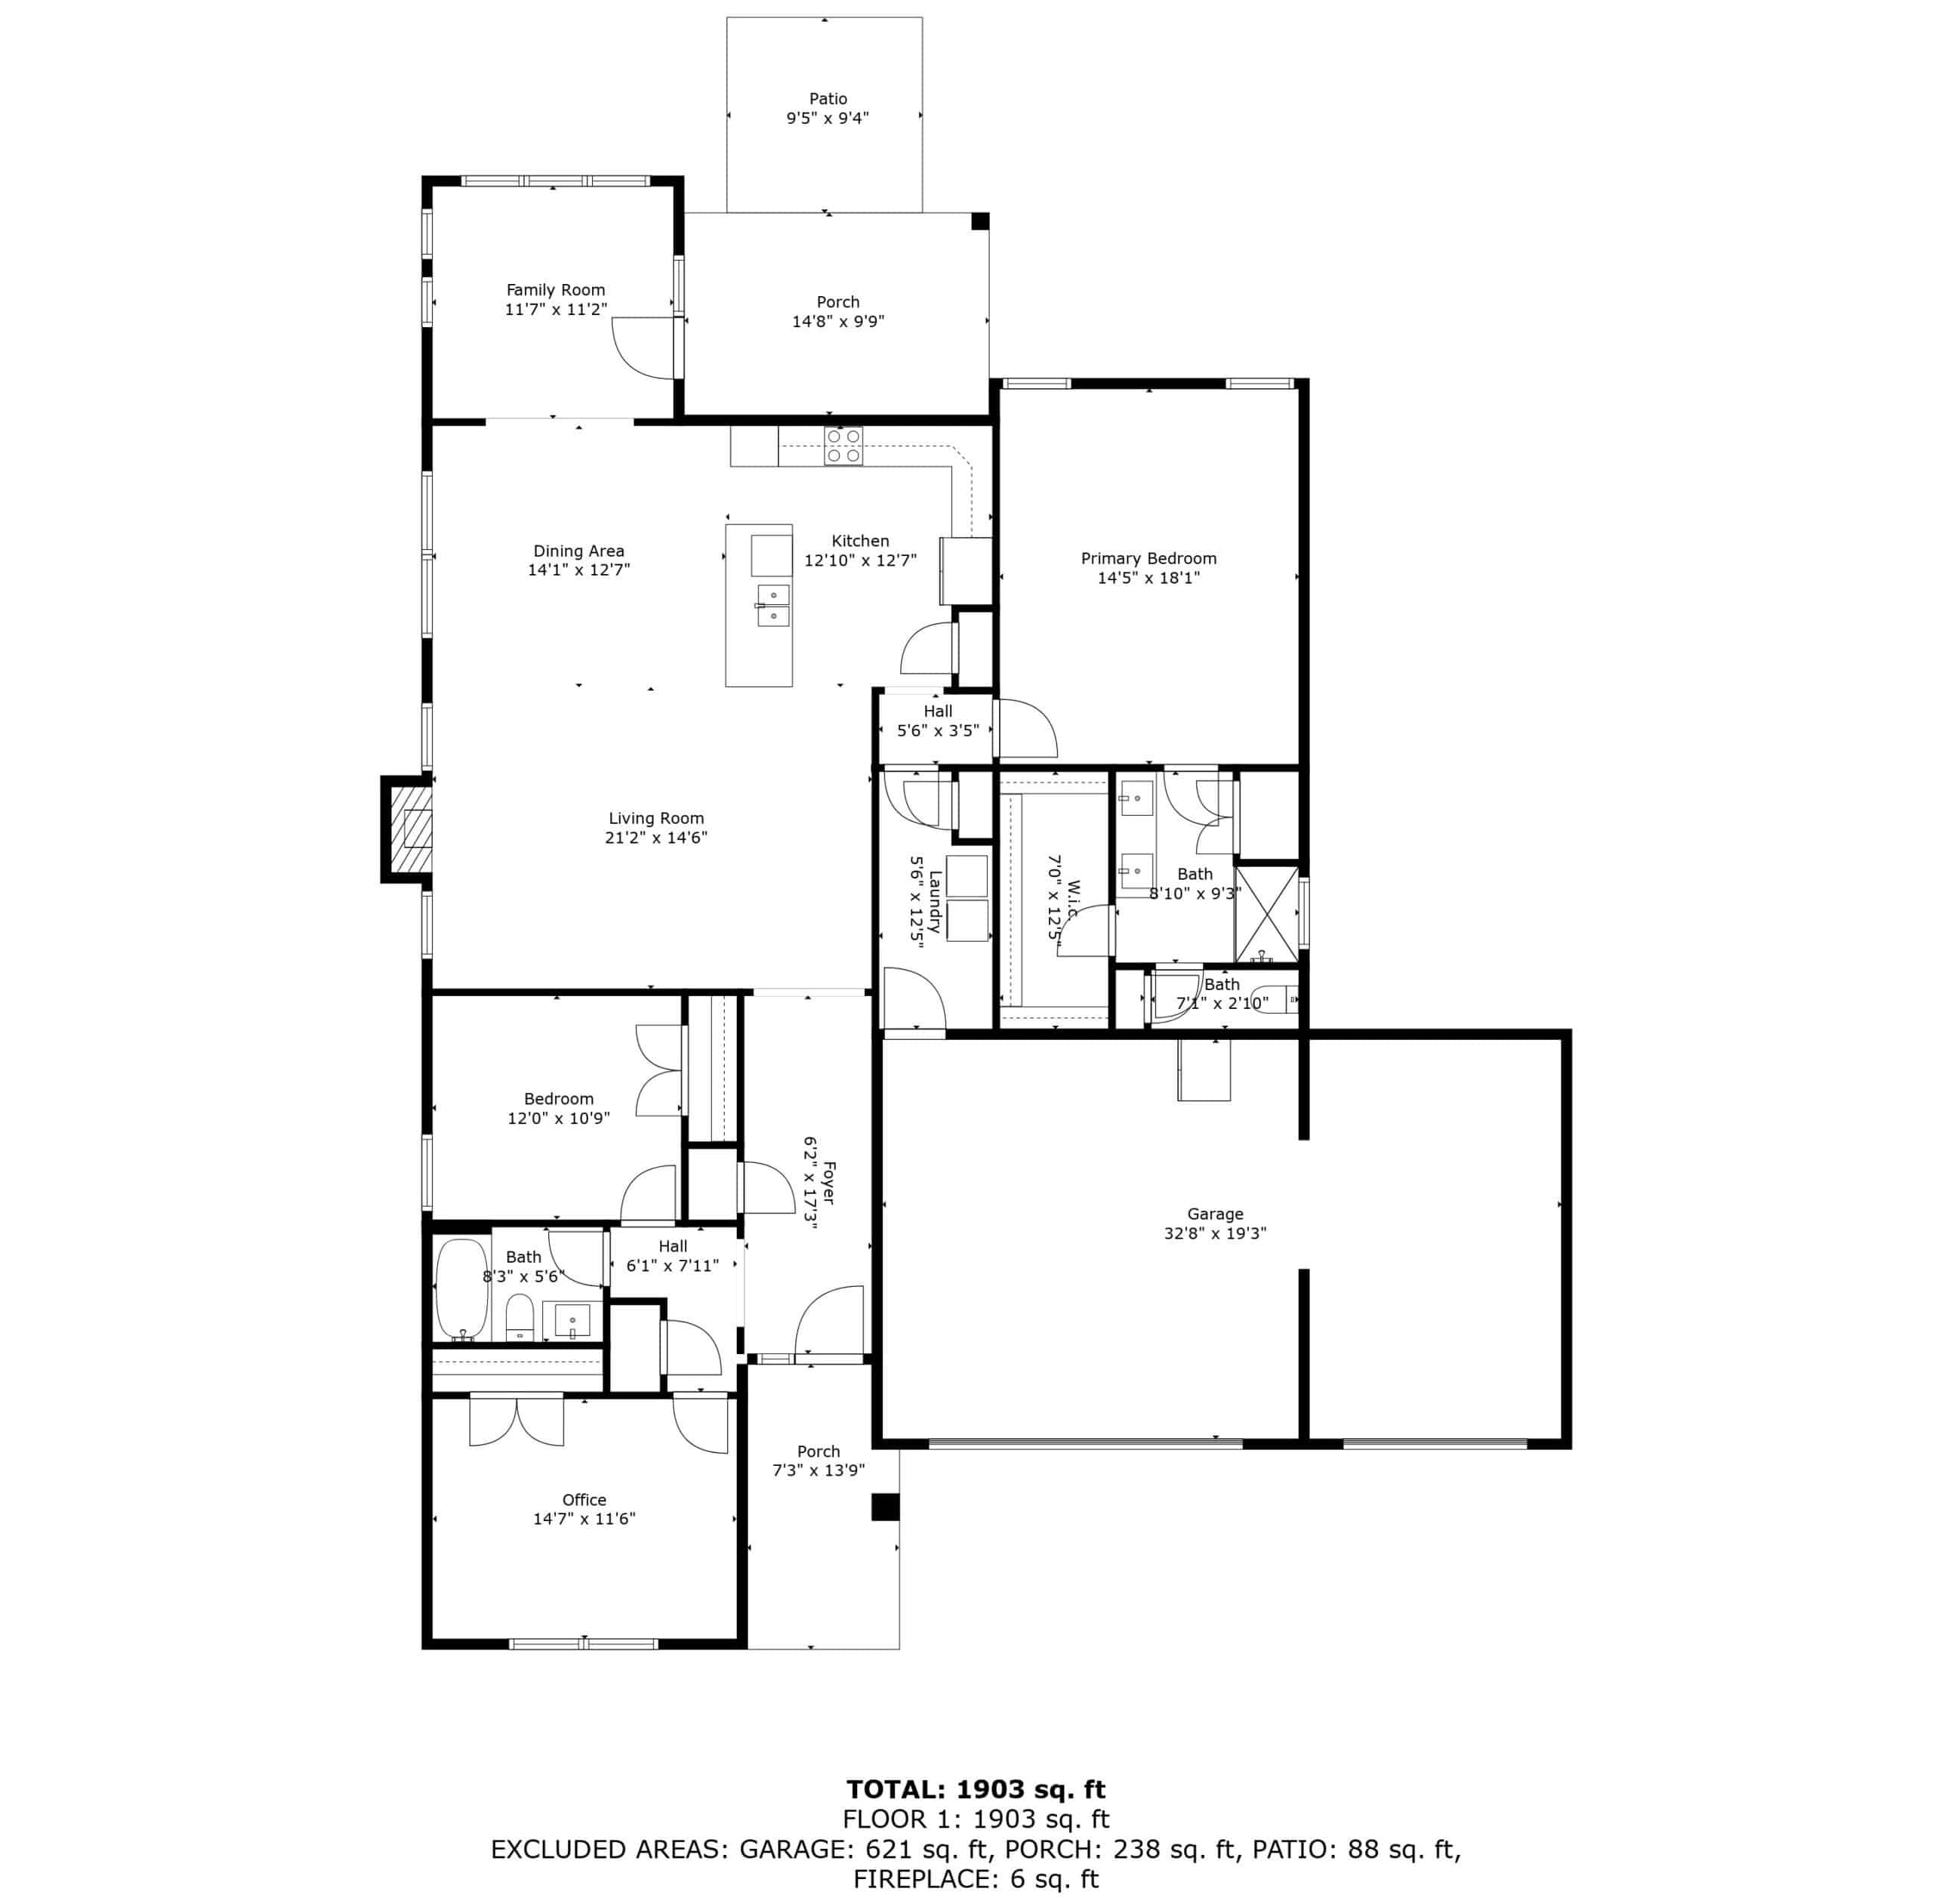 Example of real estate floor plan